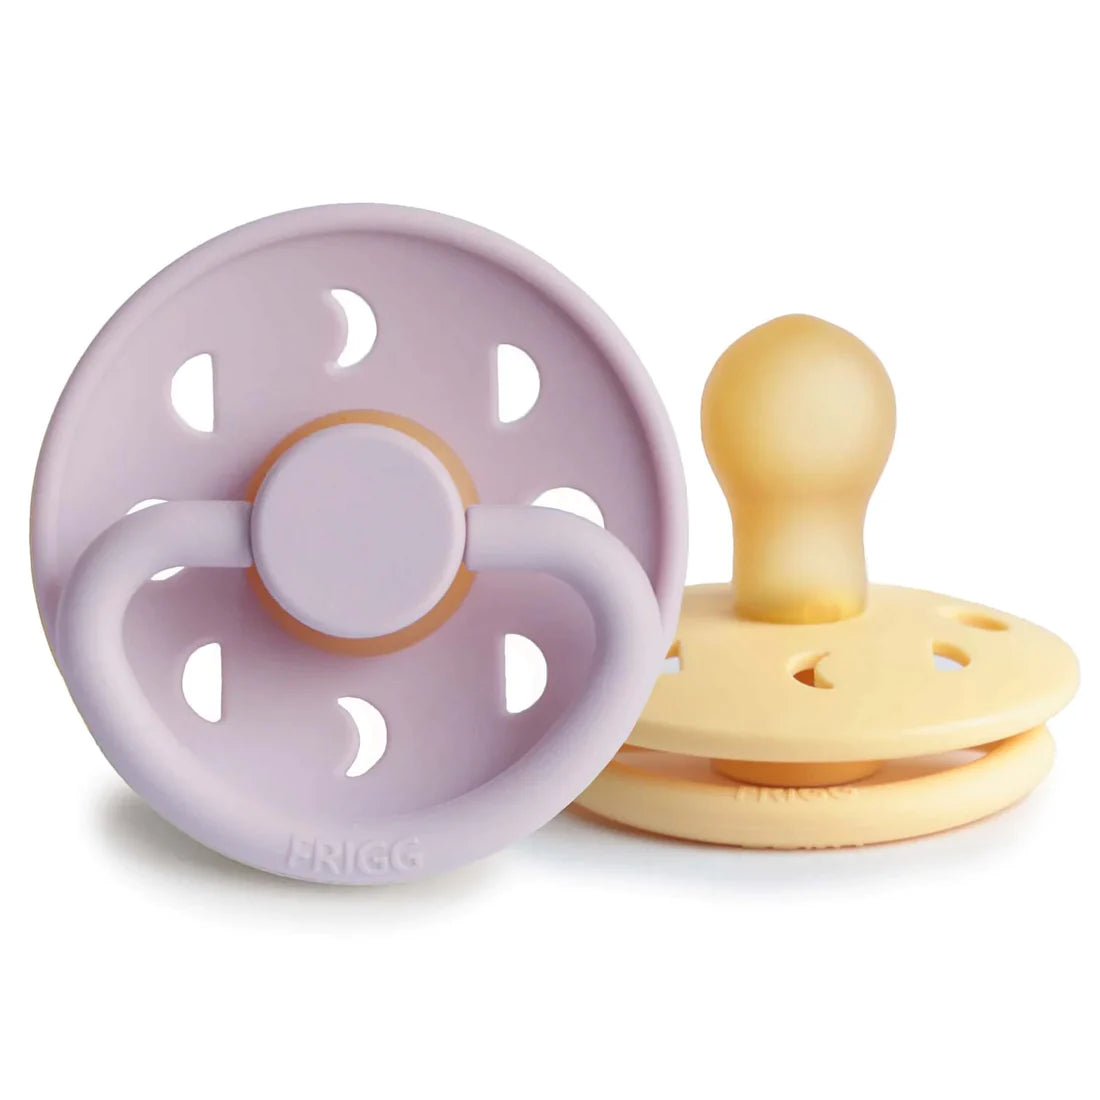 FRIGG PACIFIERS 2-PACK - THE LITTLE EAGLE BOUTIQUE